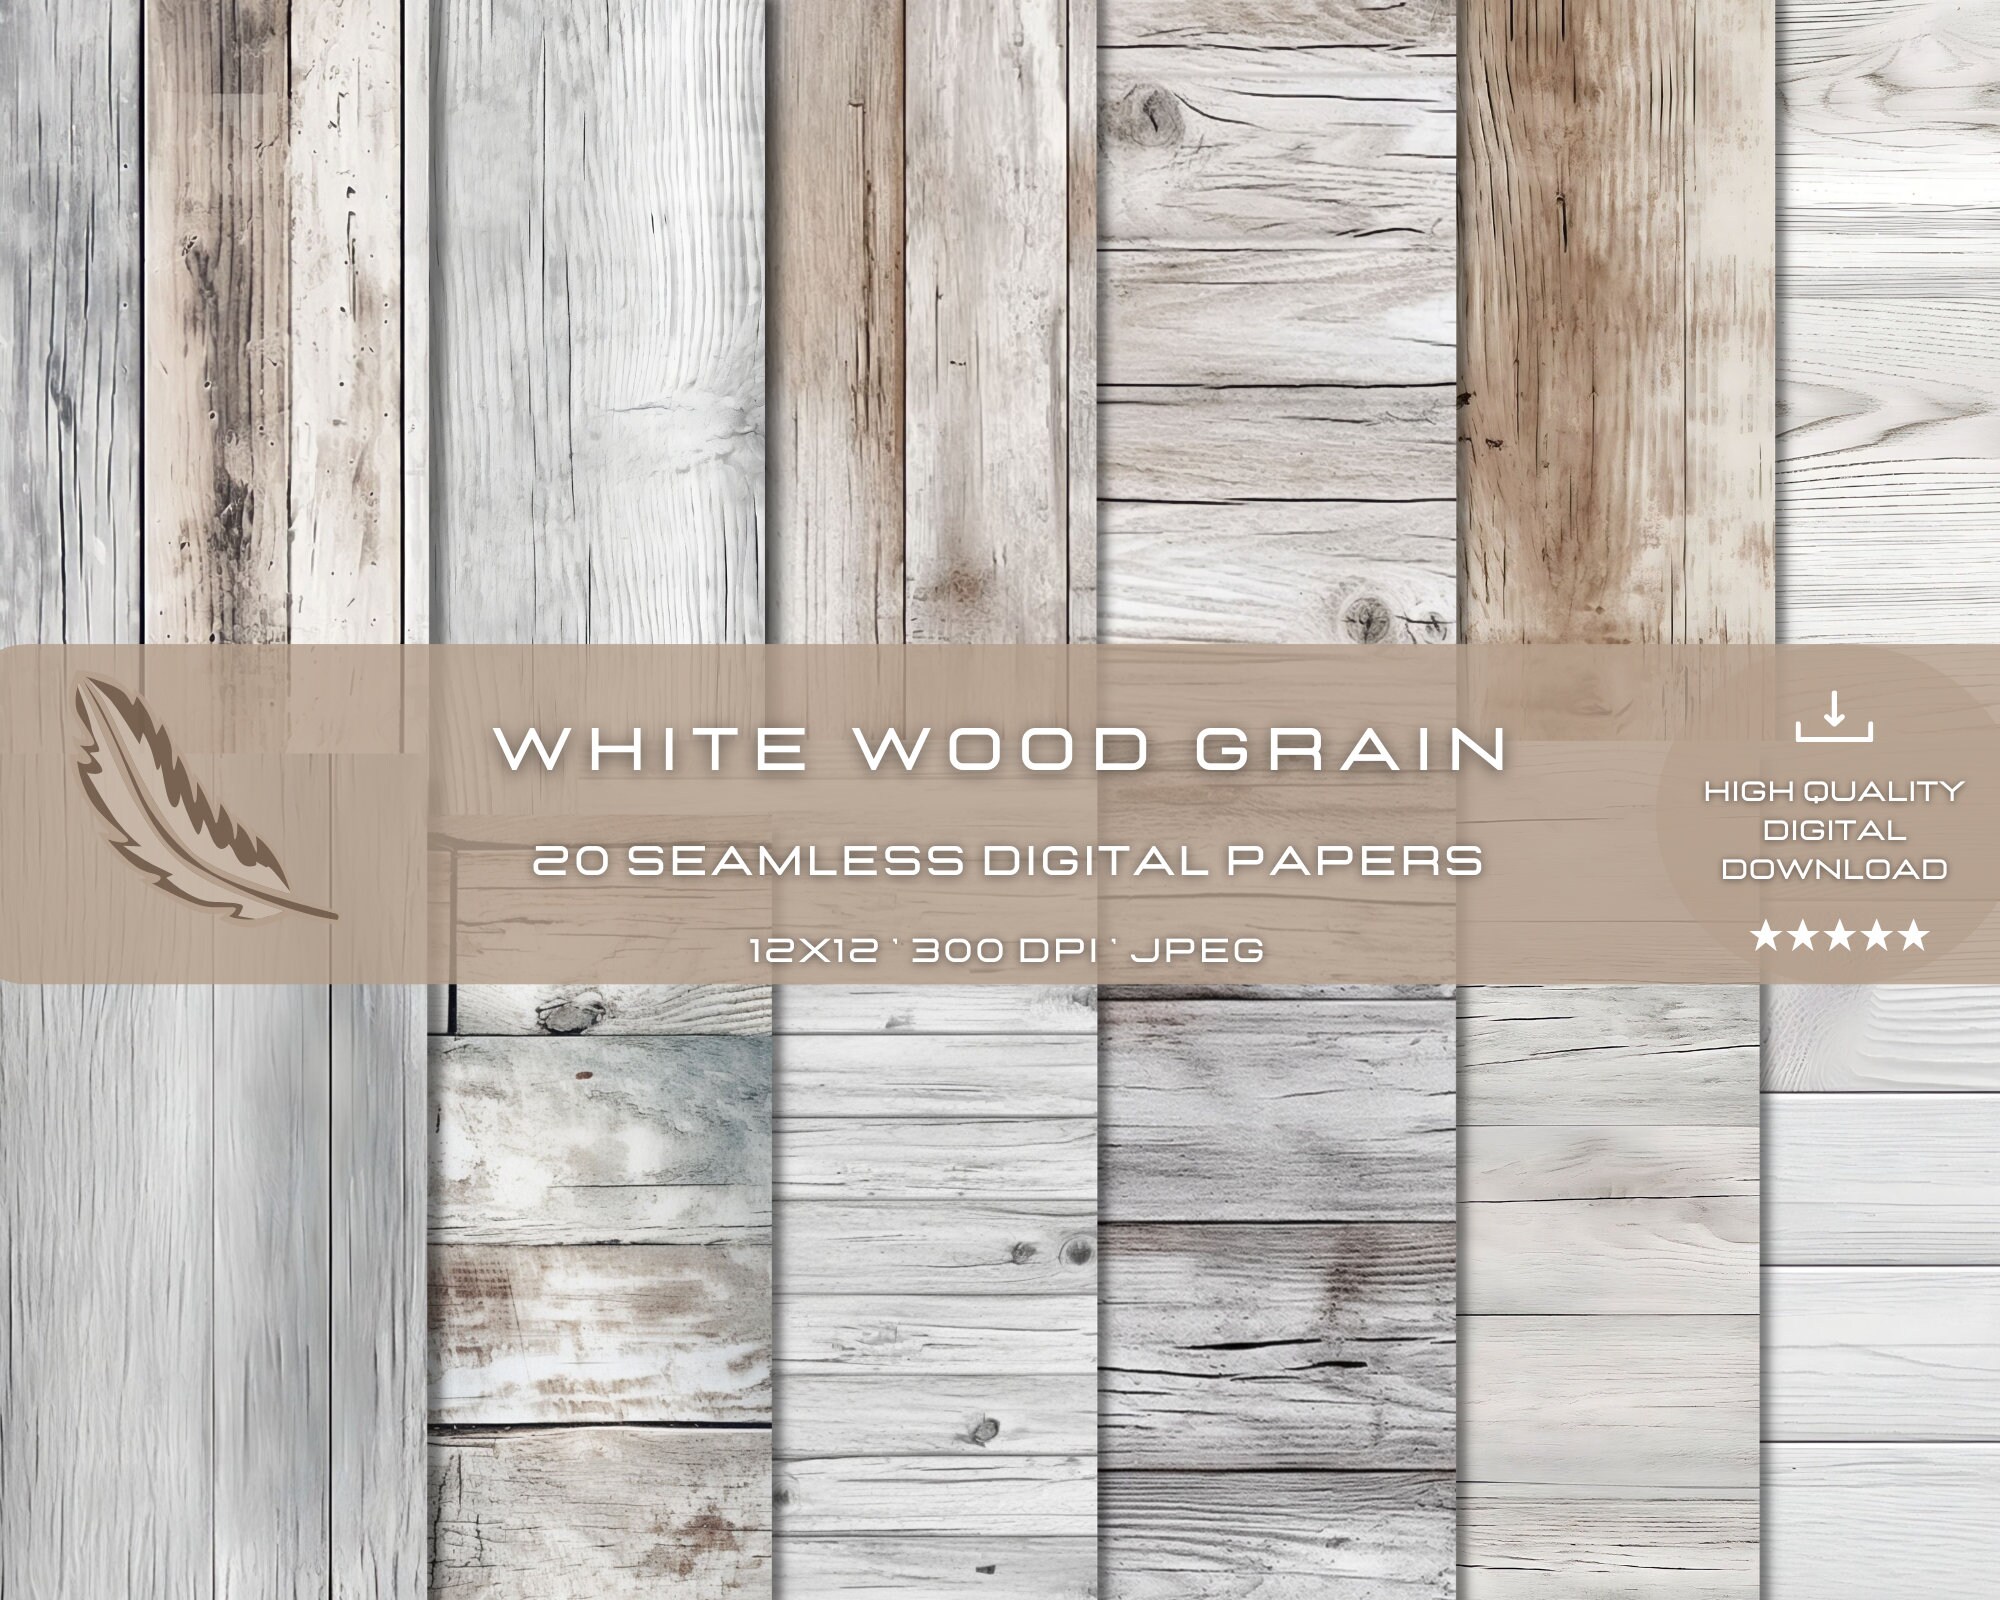 Rustic White Craft Paper With Textured Lines Ideal For Design